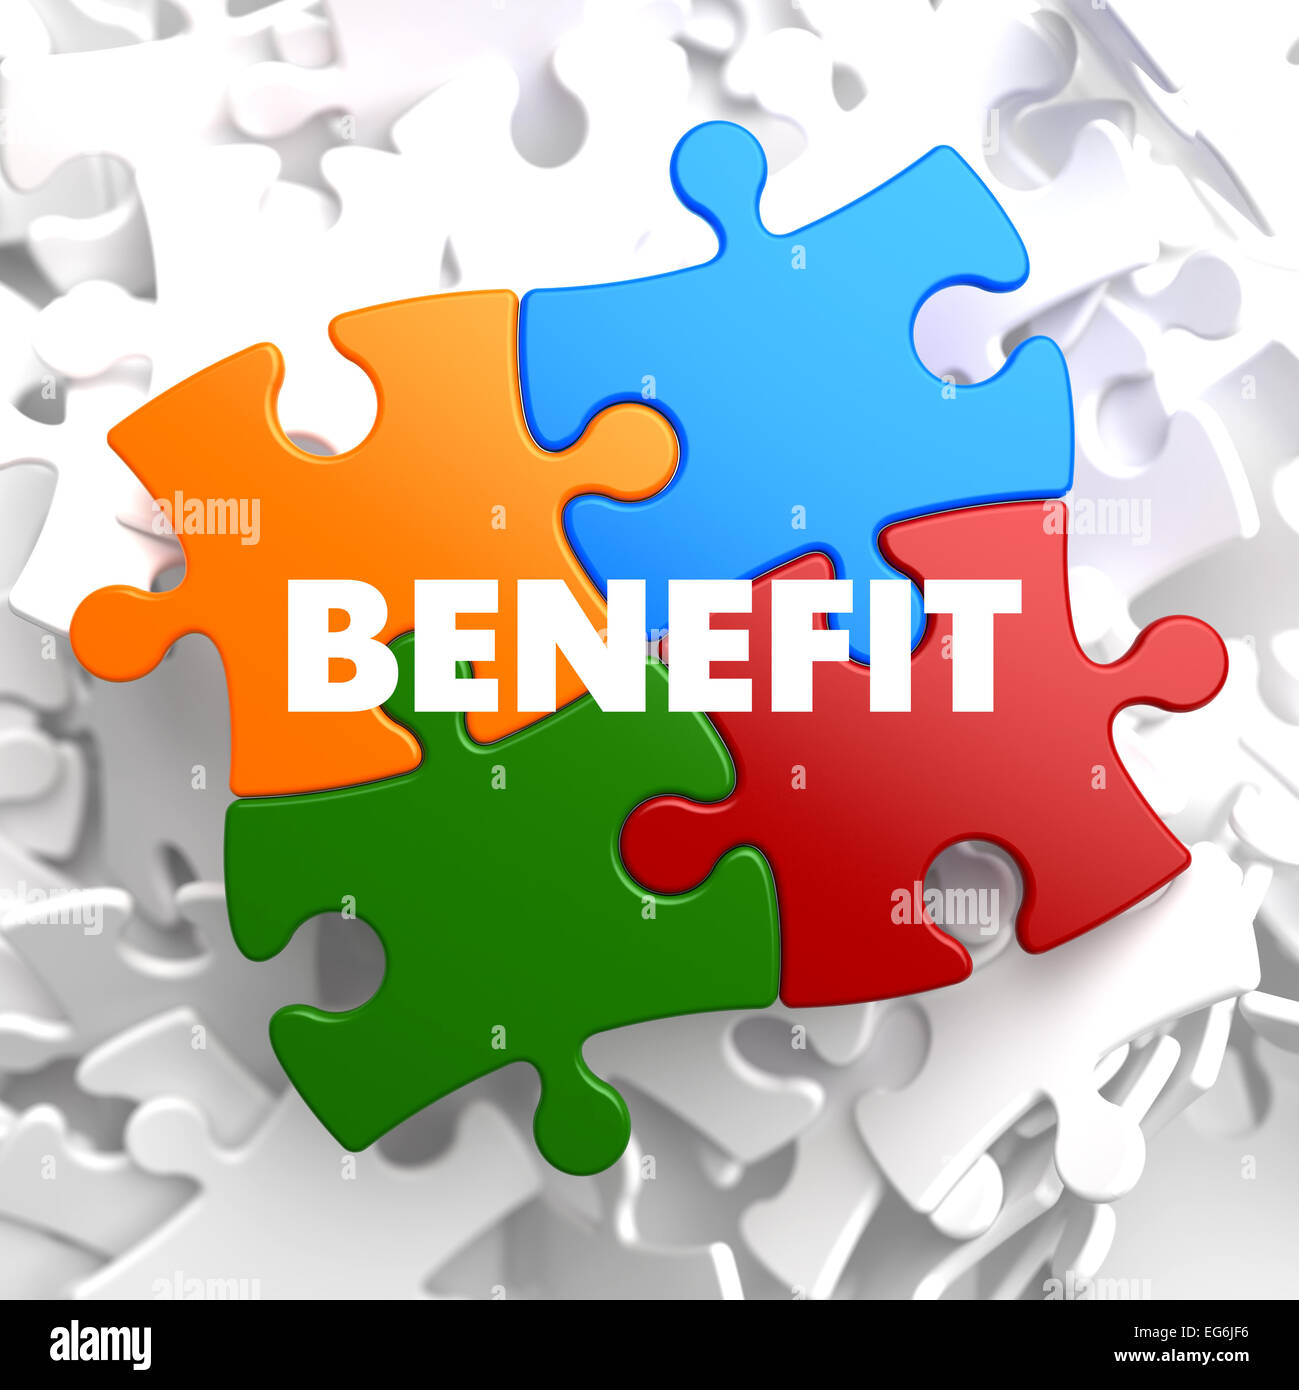 Benefit on Multicolor Puzzle on White Background. Stock Photo